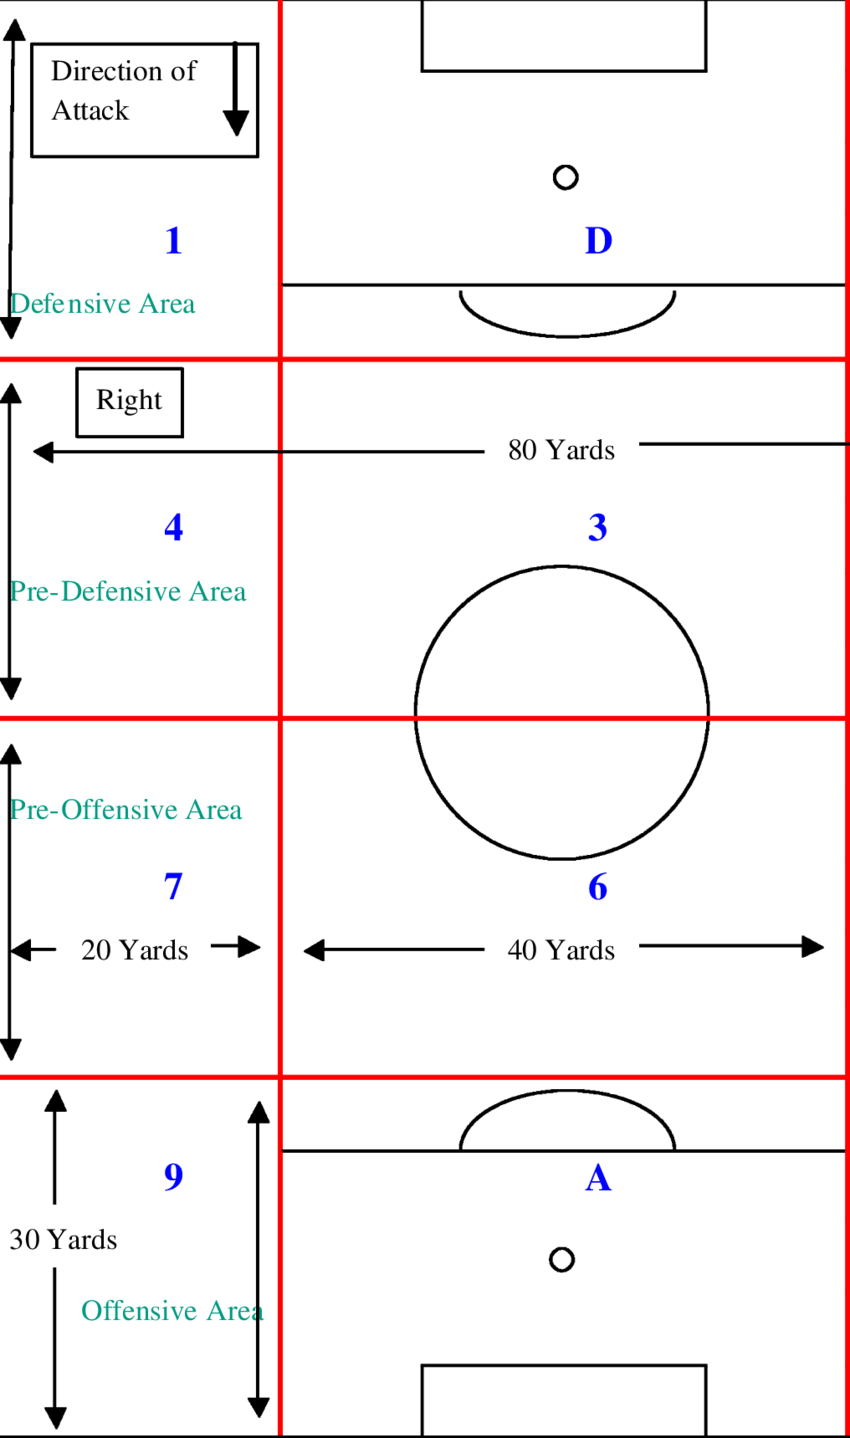 Soccer Field Diagram Structure Of The Grid Used To Identify Strategic Areas Of The Soccer